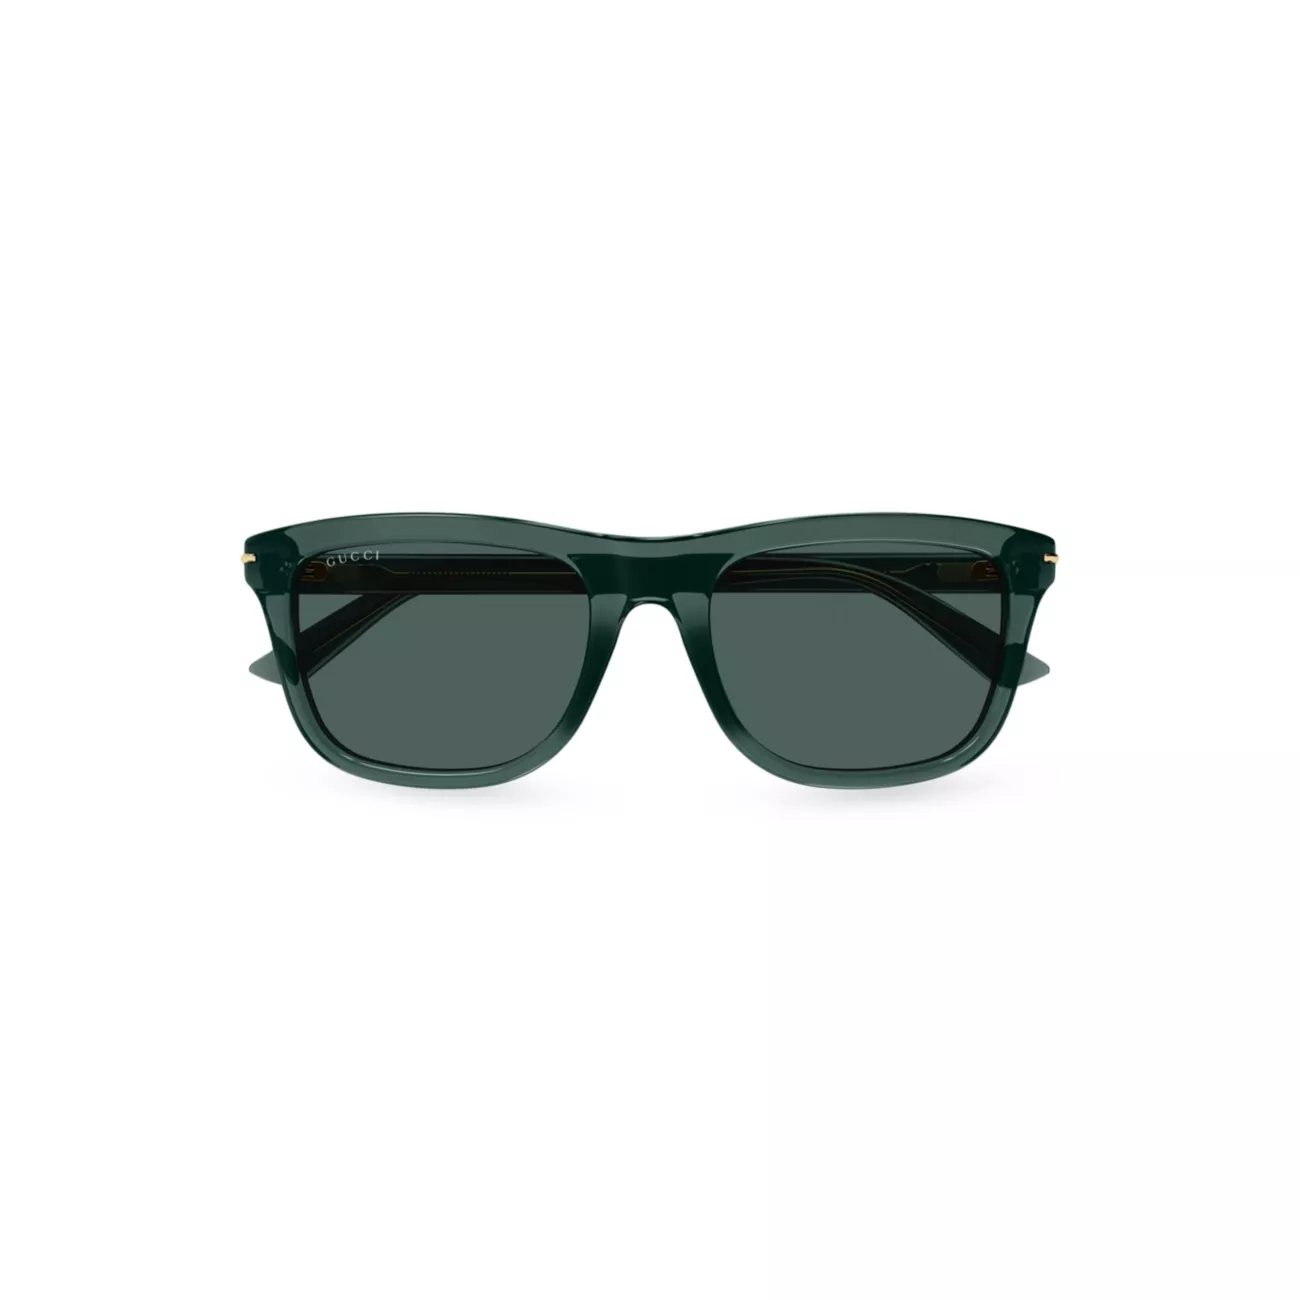 GG Line Squared Recycled Acetate Sunglasses GUCCI